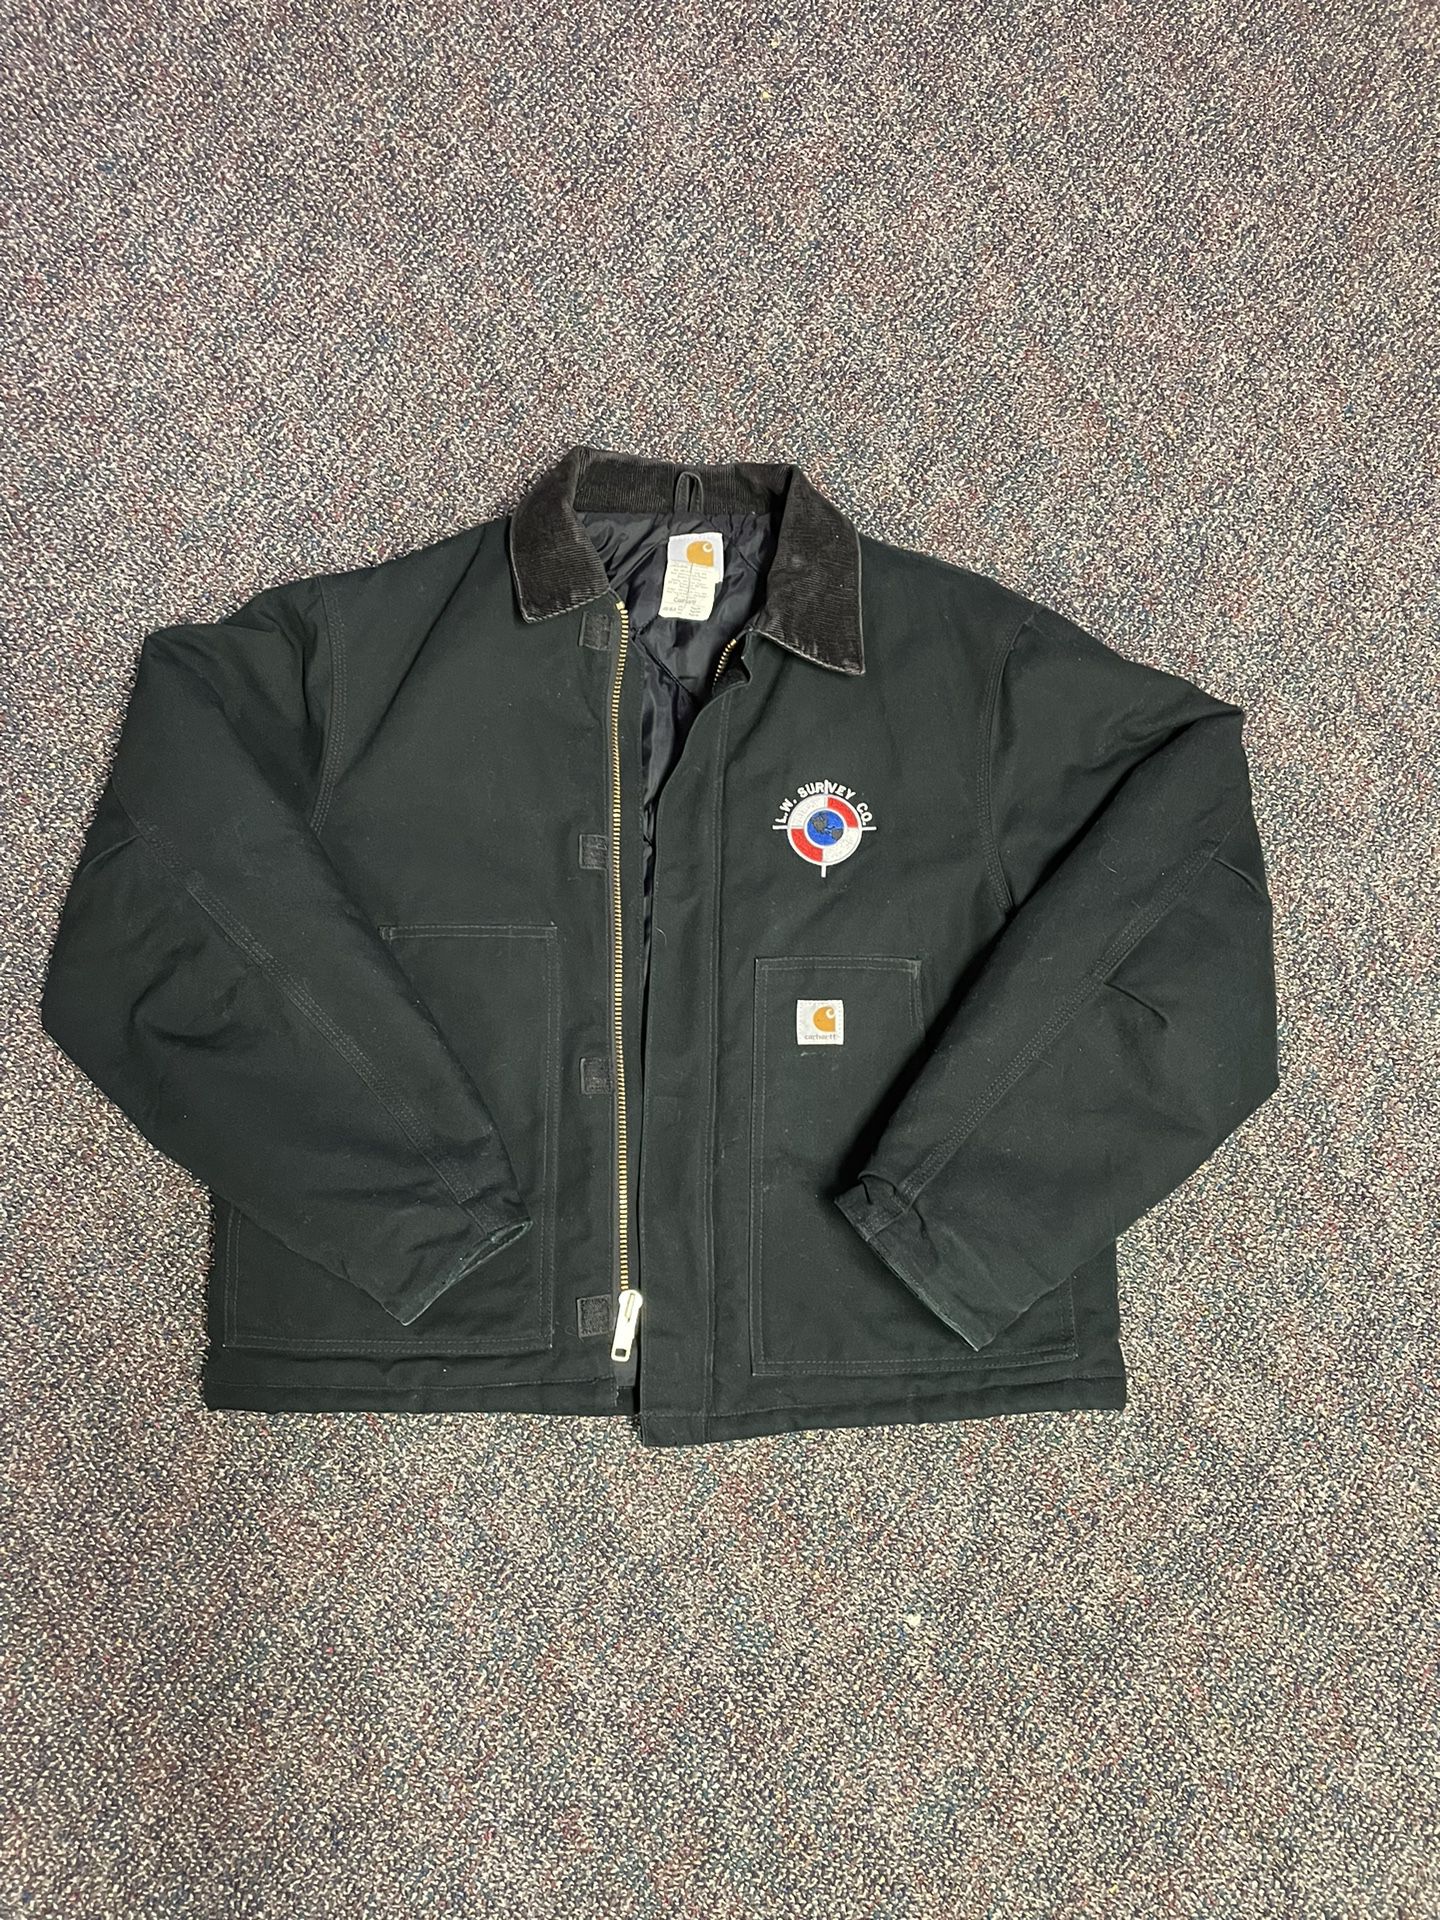 Carhartt Jacket Quilted Lining